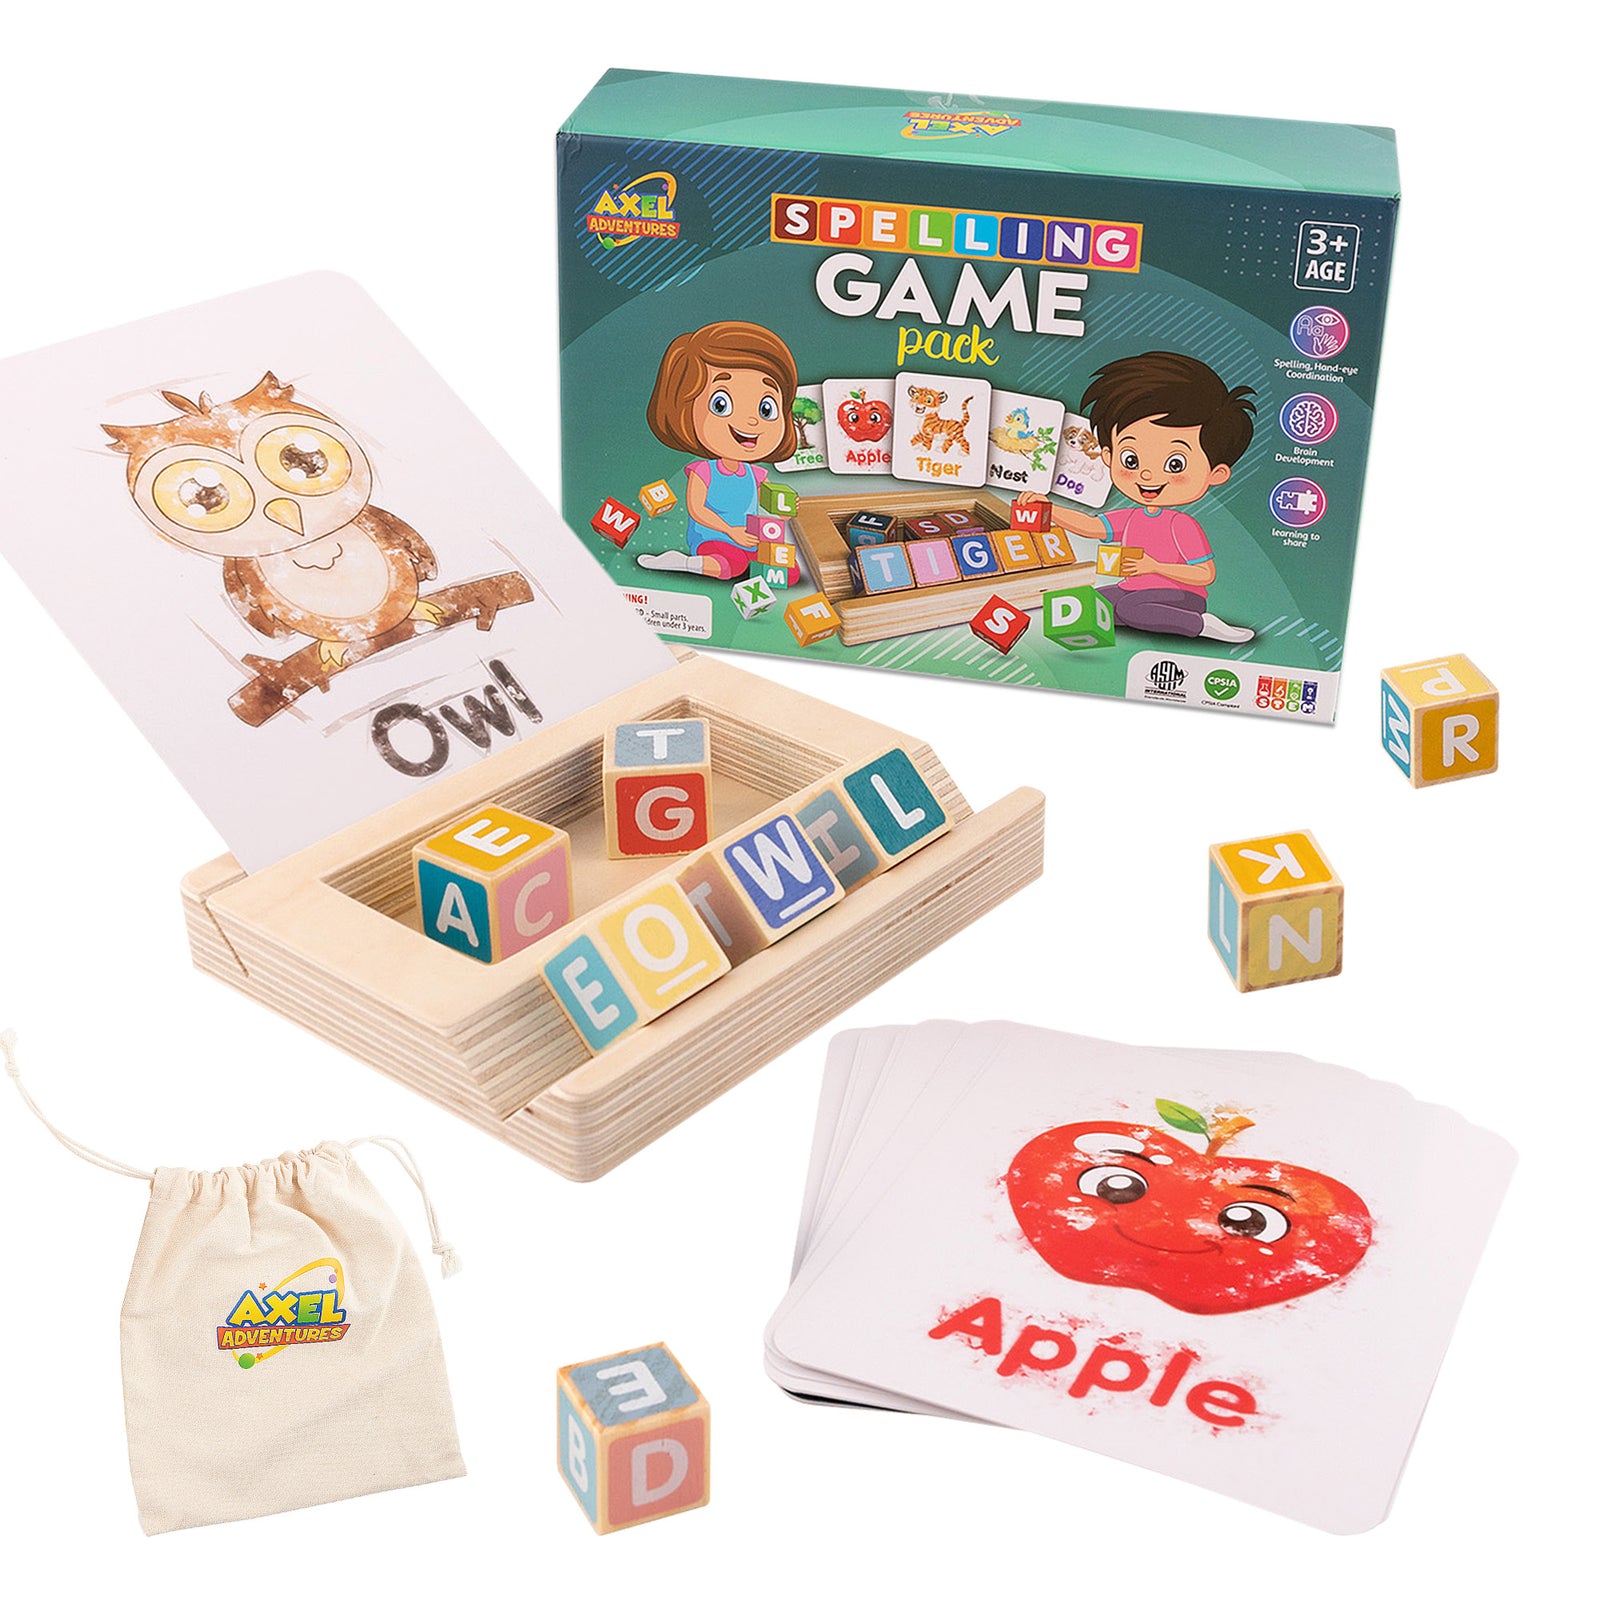 Spelling Game for Kids, Montessori Educational Toy for 3+ Year Old Pre-K Toddler Includes 8 Wooden Blocks and Illustrated Cards, Alphabet Learning Toy Boosts Brain Development, Hand-Eye Coordination - Axel Adventures